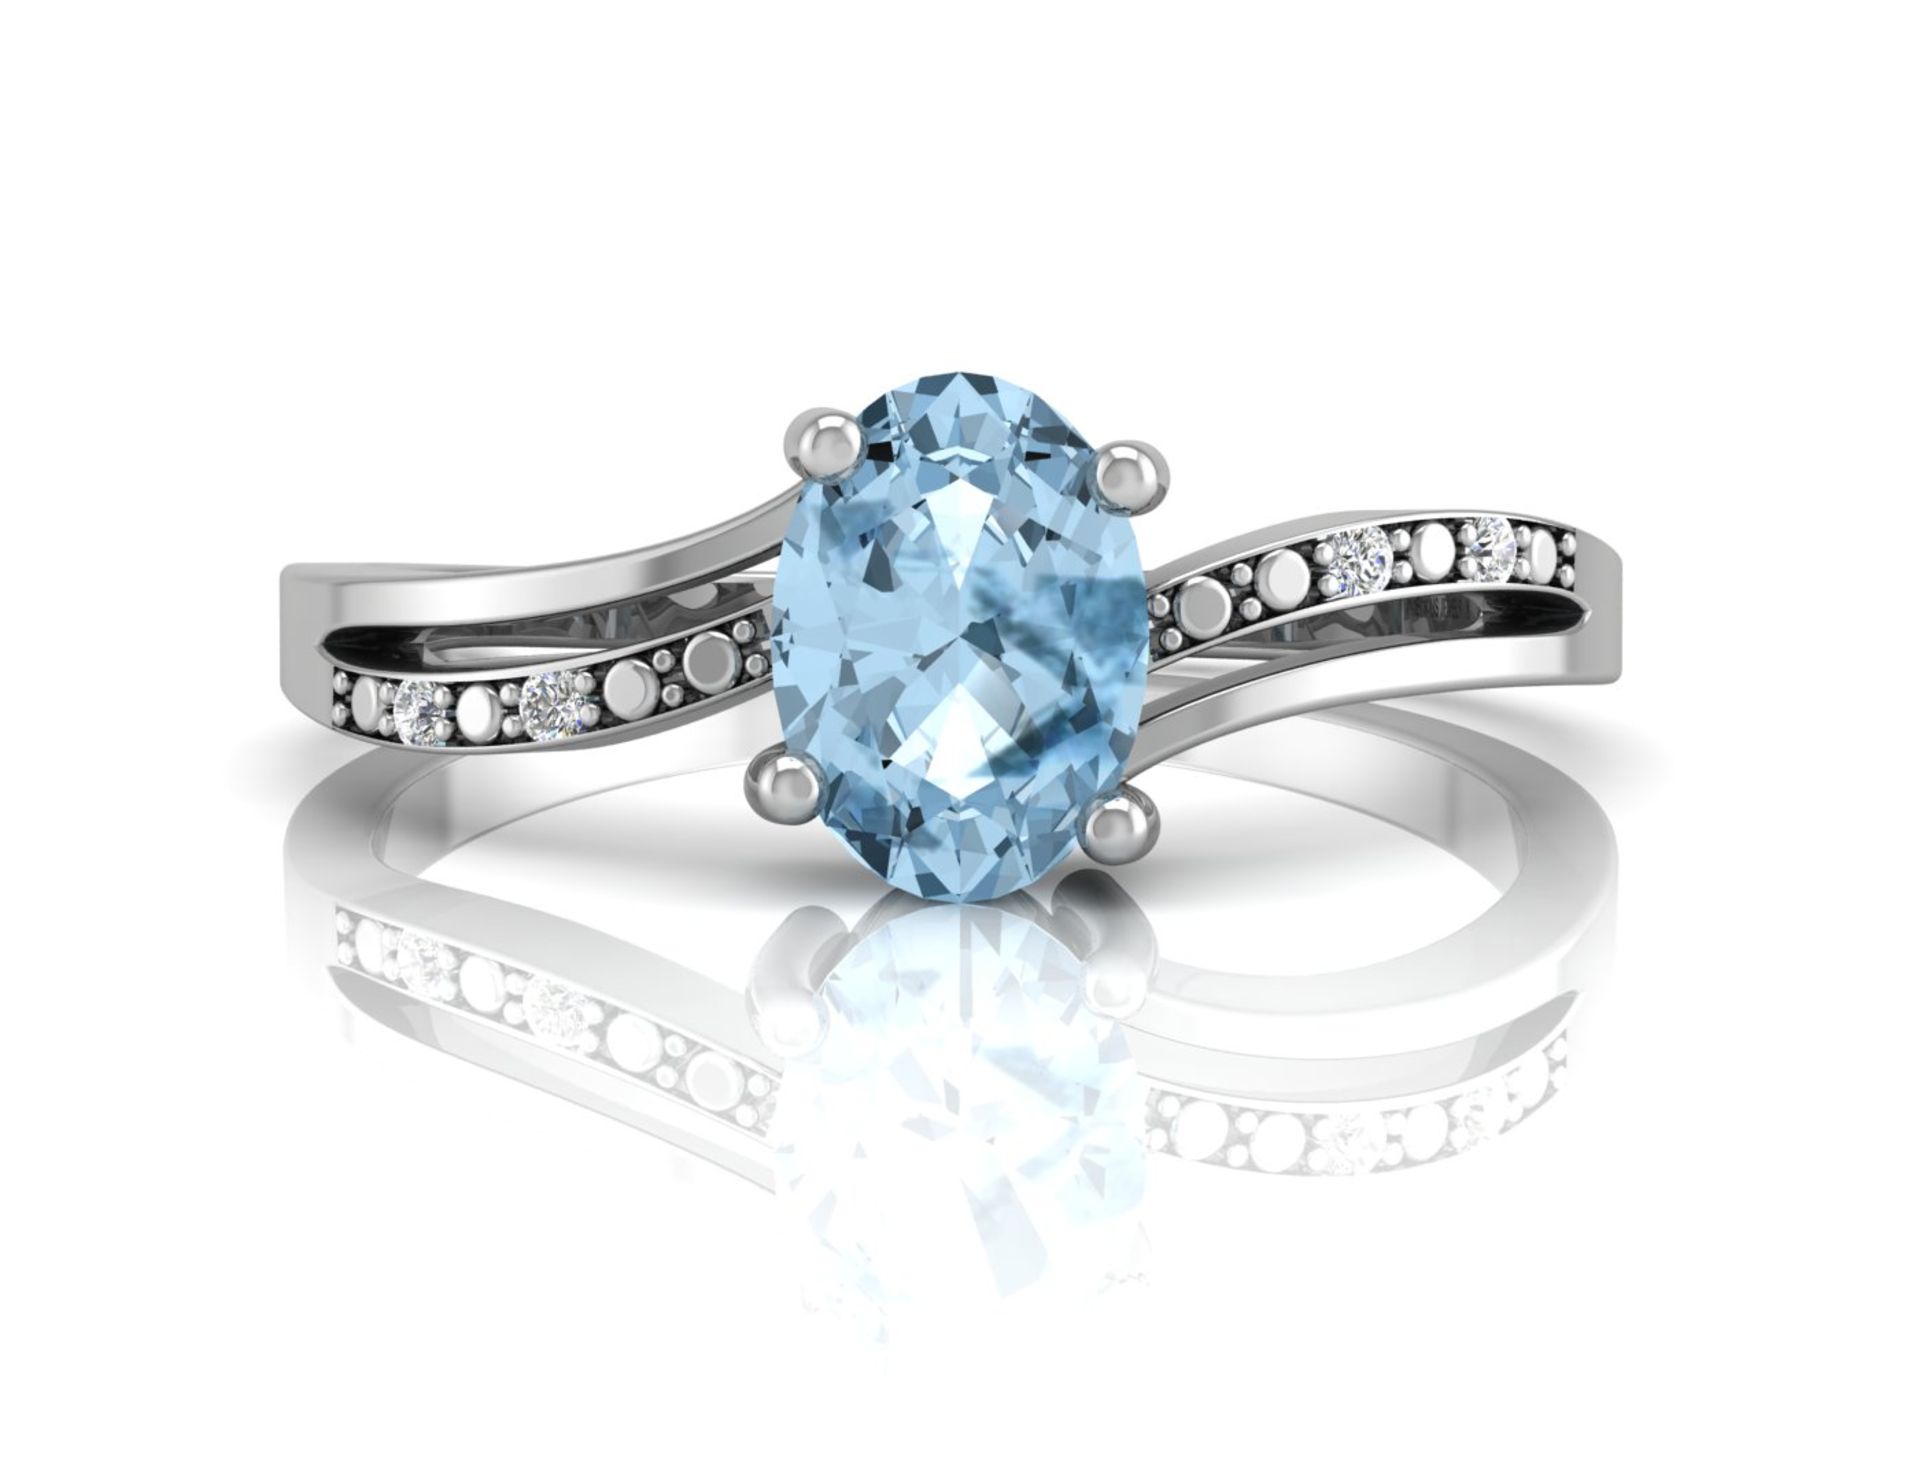 9ct White Gold Diamond And Blue Topaz Ring (BT1.00) 0.02 Carats - Valued By GIE £1,070.00 - An - Image 4 of 5